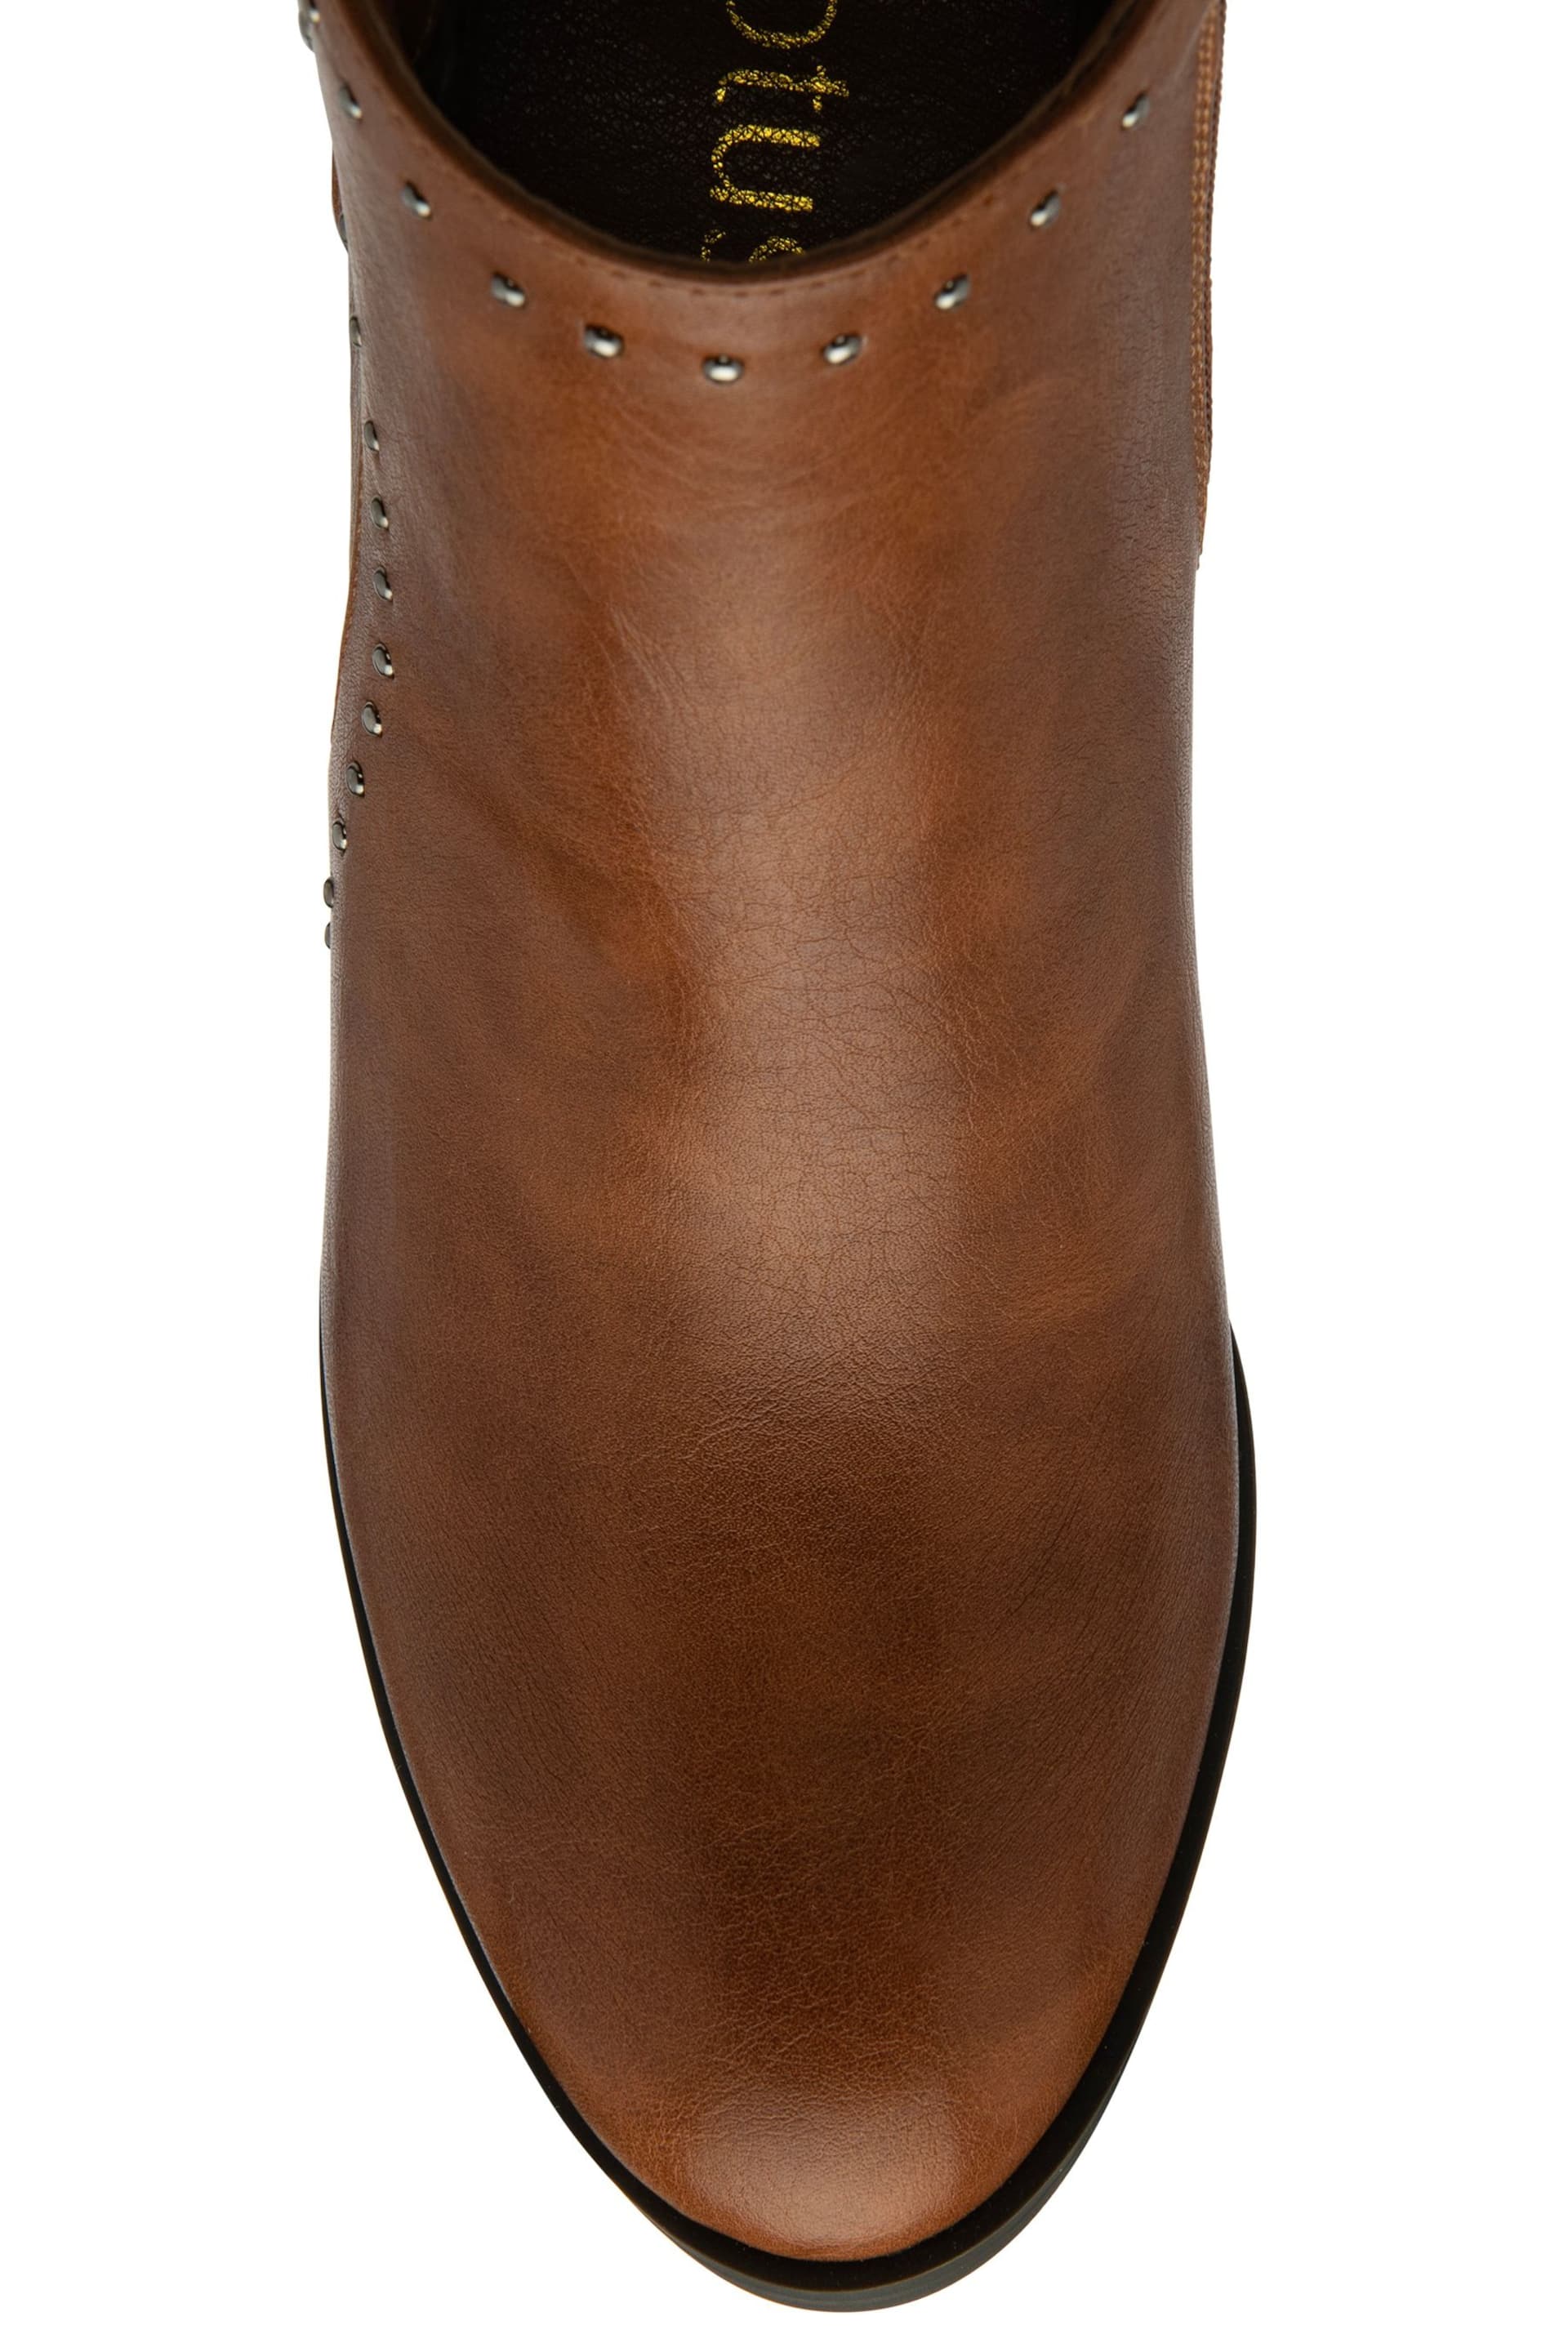 Lotus Brown Ankle Boots - Image 4 of 4